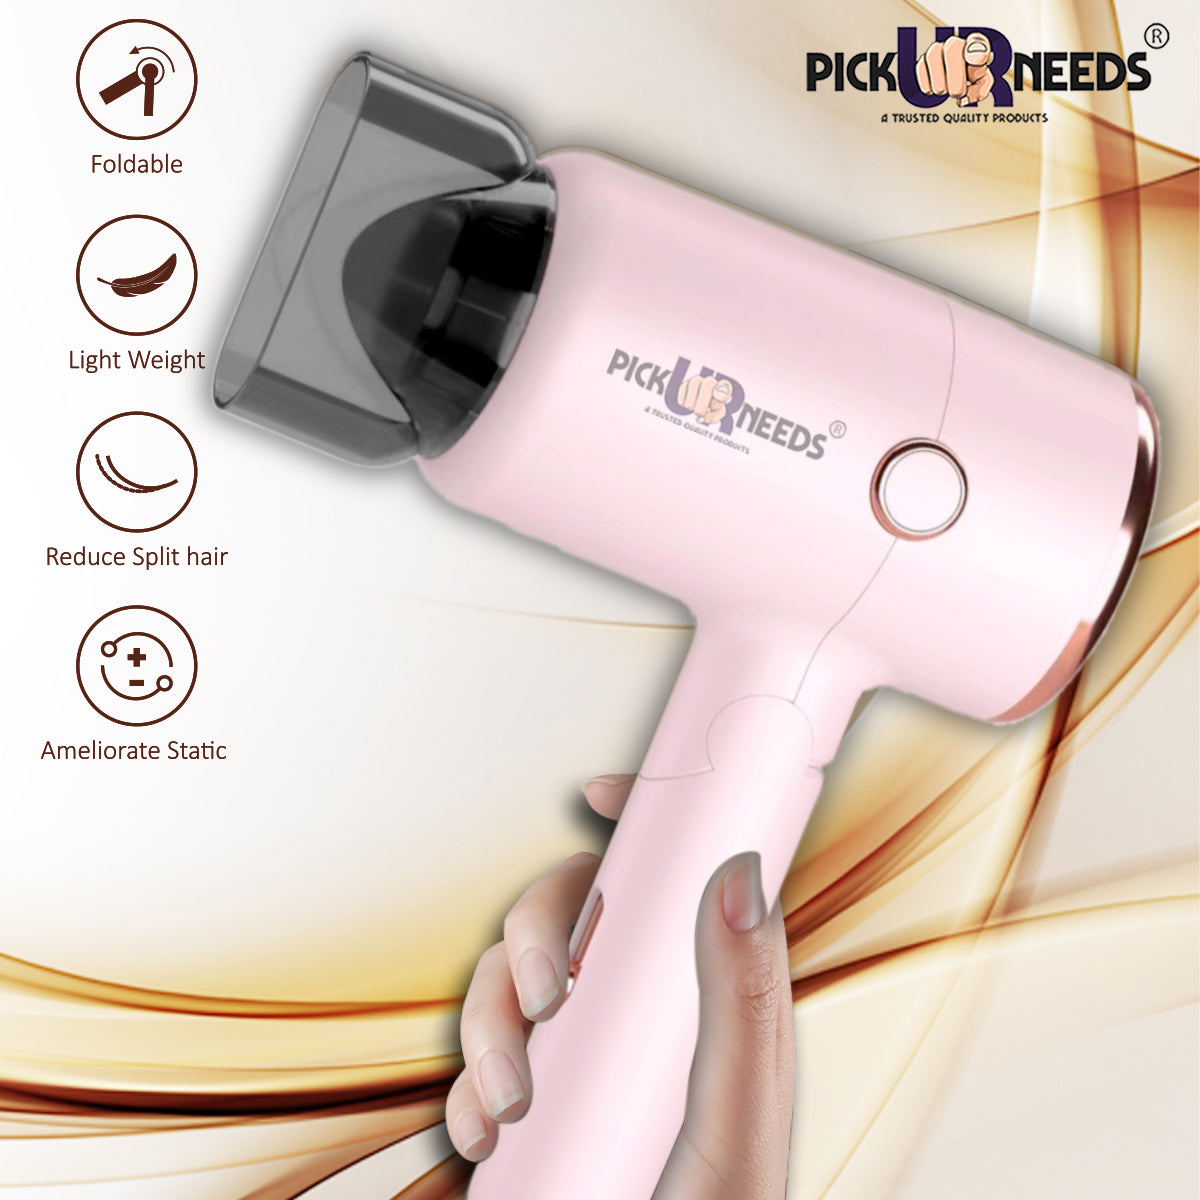 Pick Ur Needs Hair Dryer Stylish 2000W Mini Professional Hot & Cold with Handle Foldable,2 comb & Nozzle For Men & Women